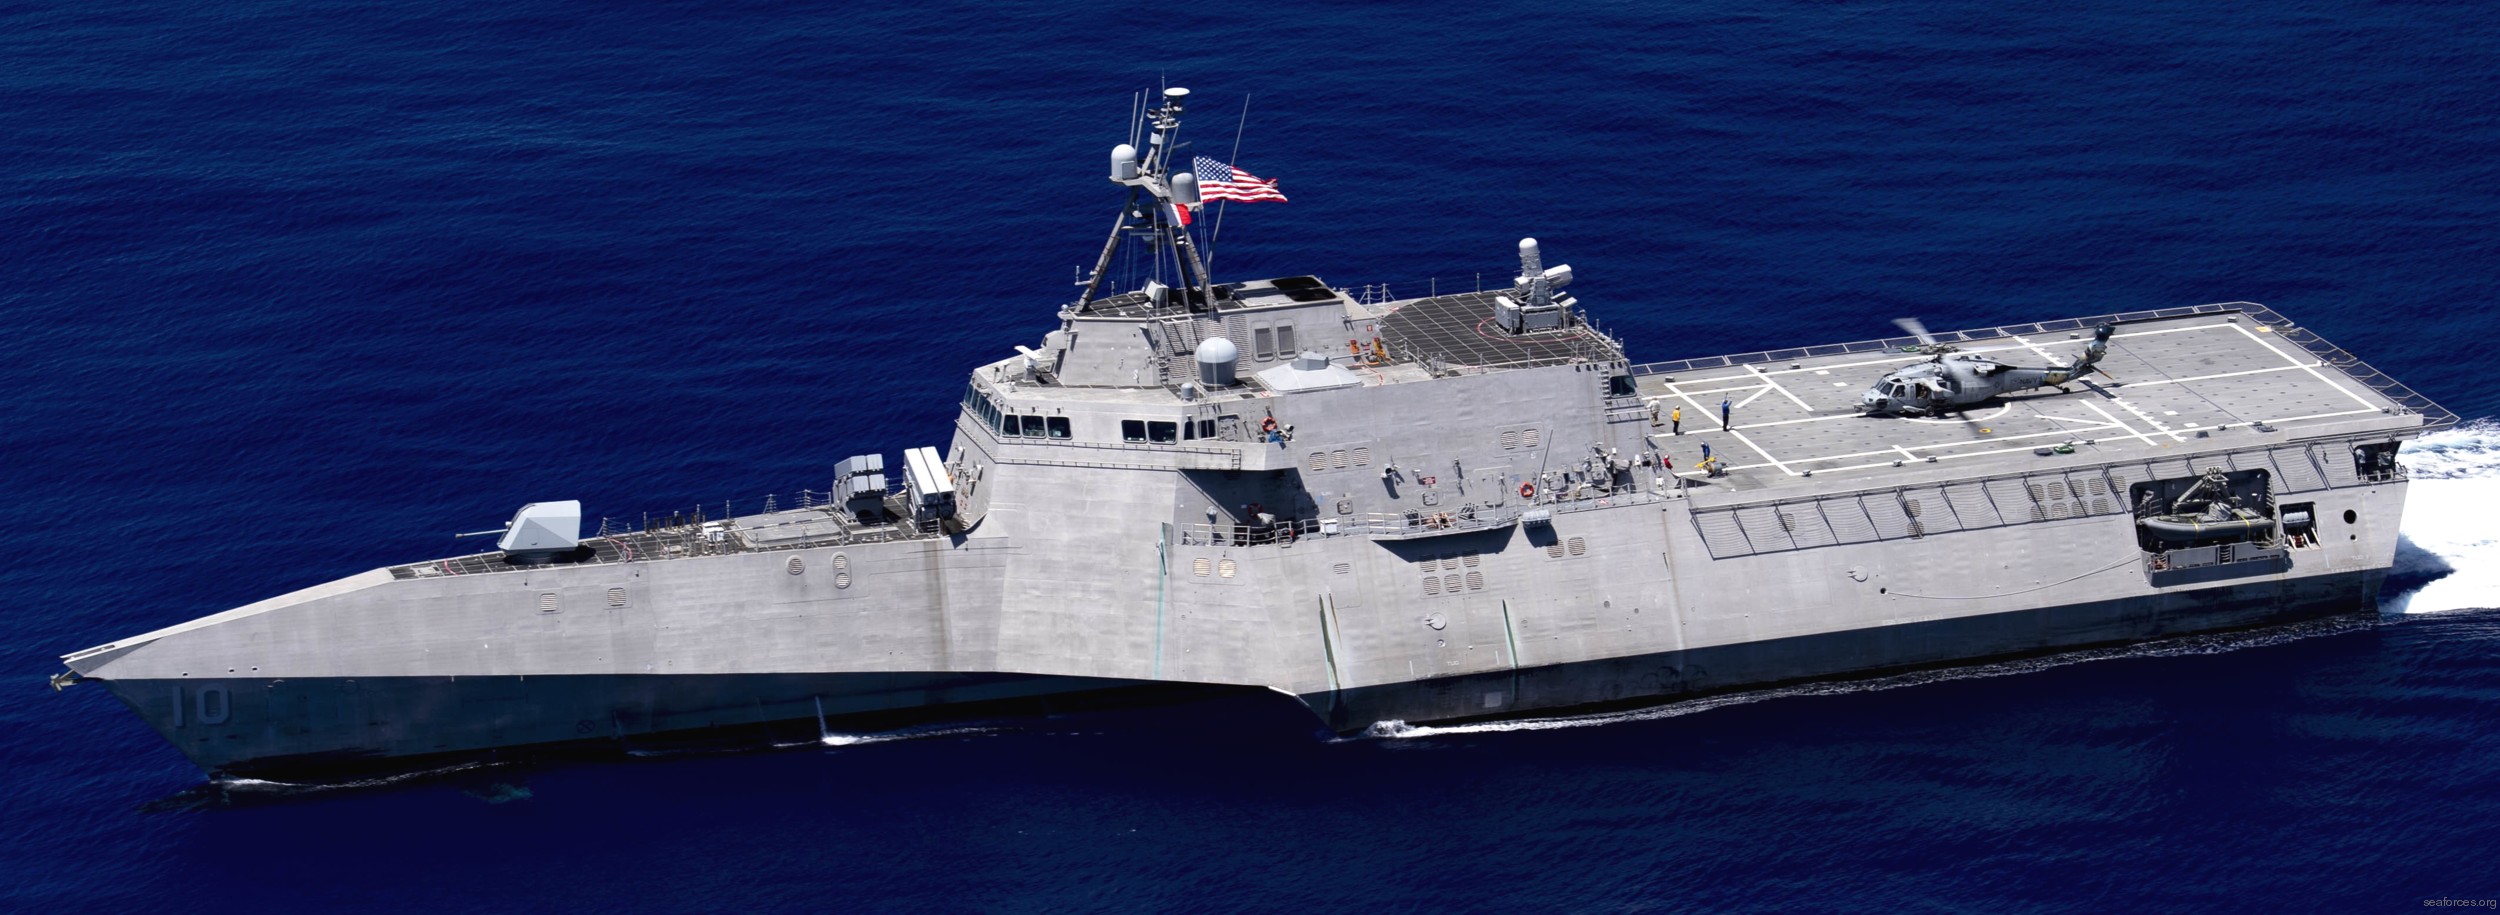 lcs-10 uss gabrielle giffords littoral combat ship independence class us navy 22